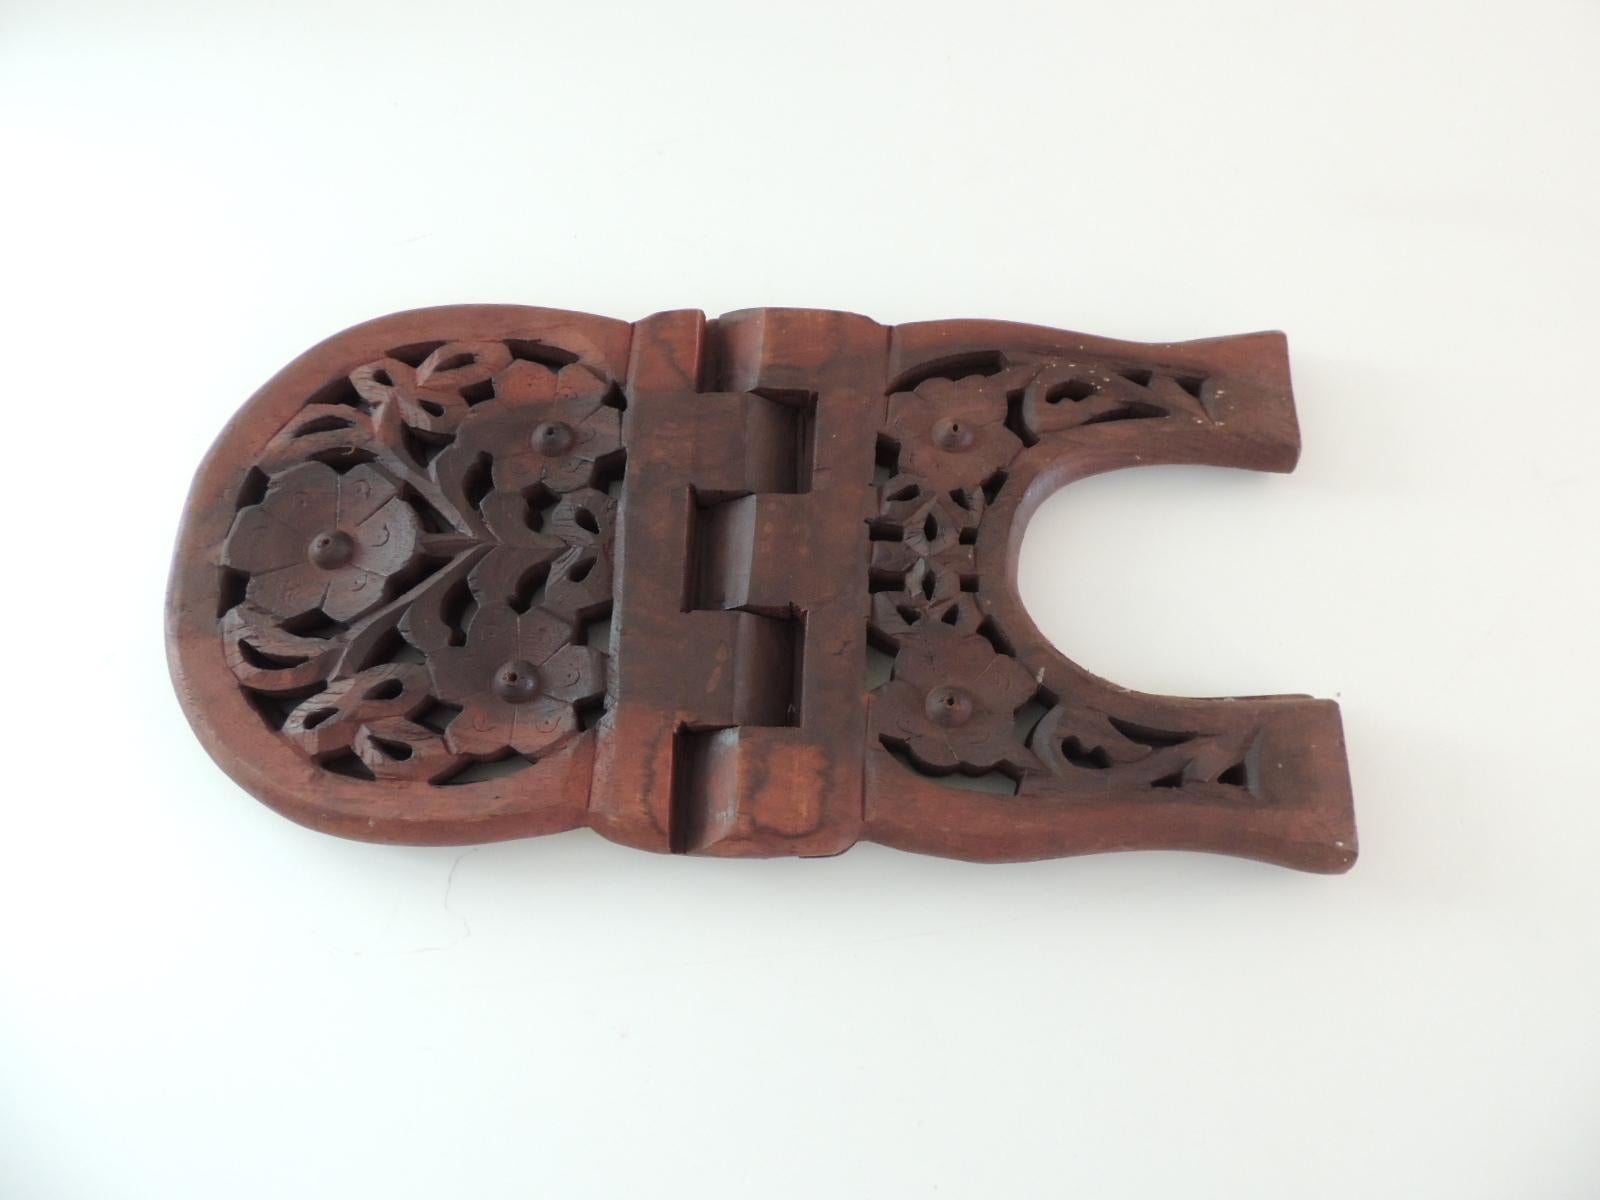 Malaysian Asian Hand Carved Book Display or Stand